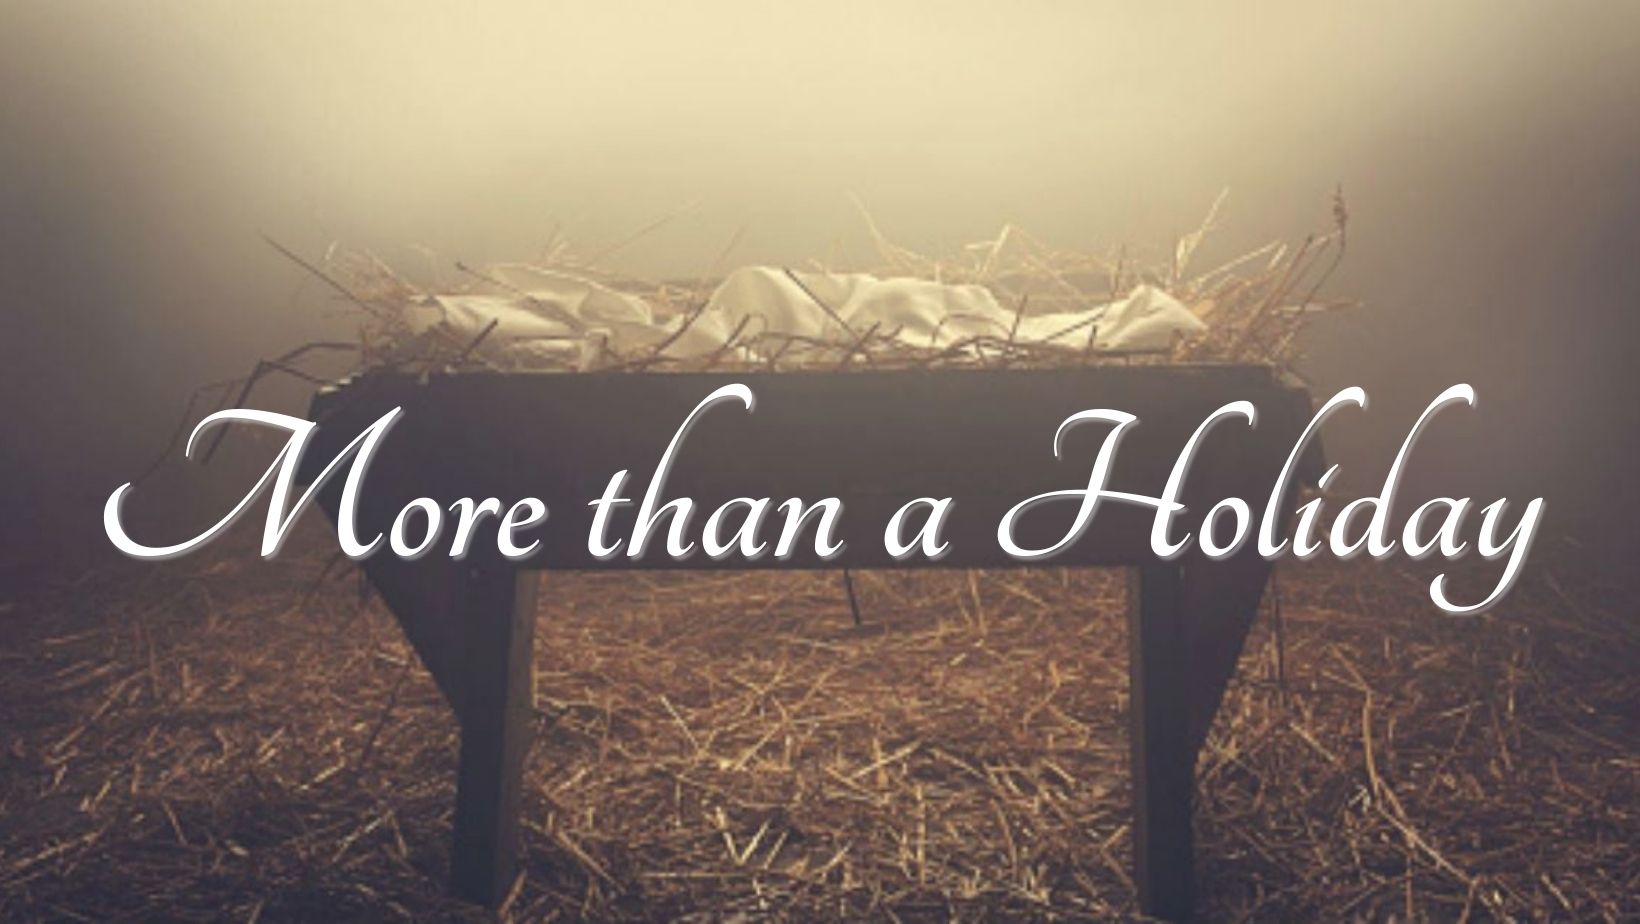 MORE THAN A HOLIDAY - LESSONS FROM CHRISTMAS - GOD SPEAKS